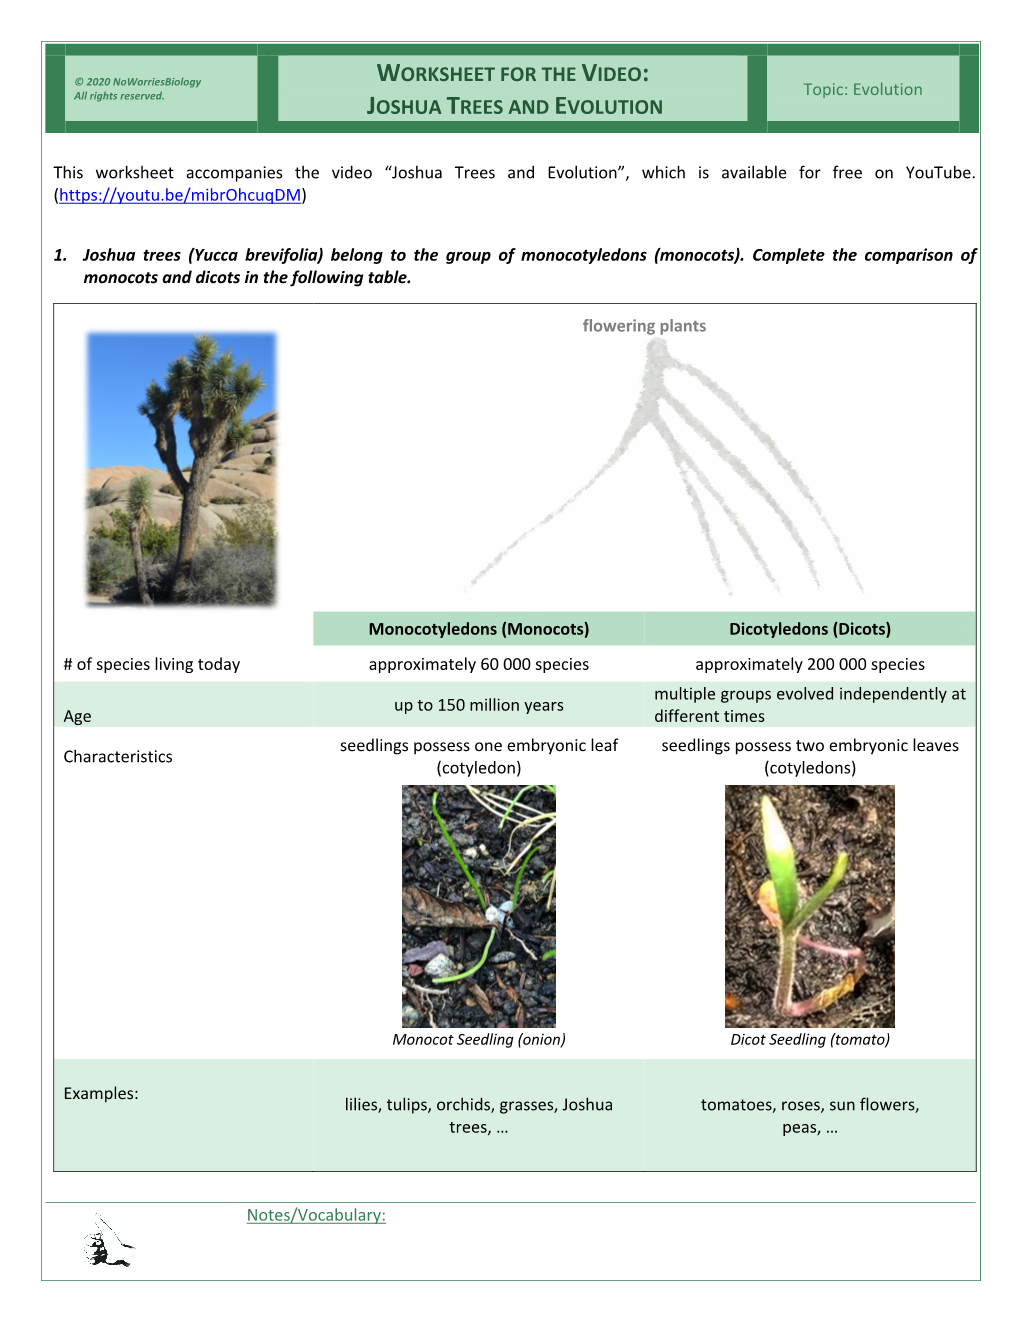 Worksheet for the Video: Joshua Trees and Evolution